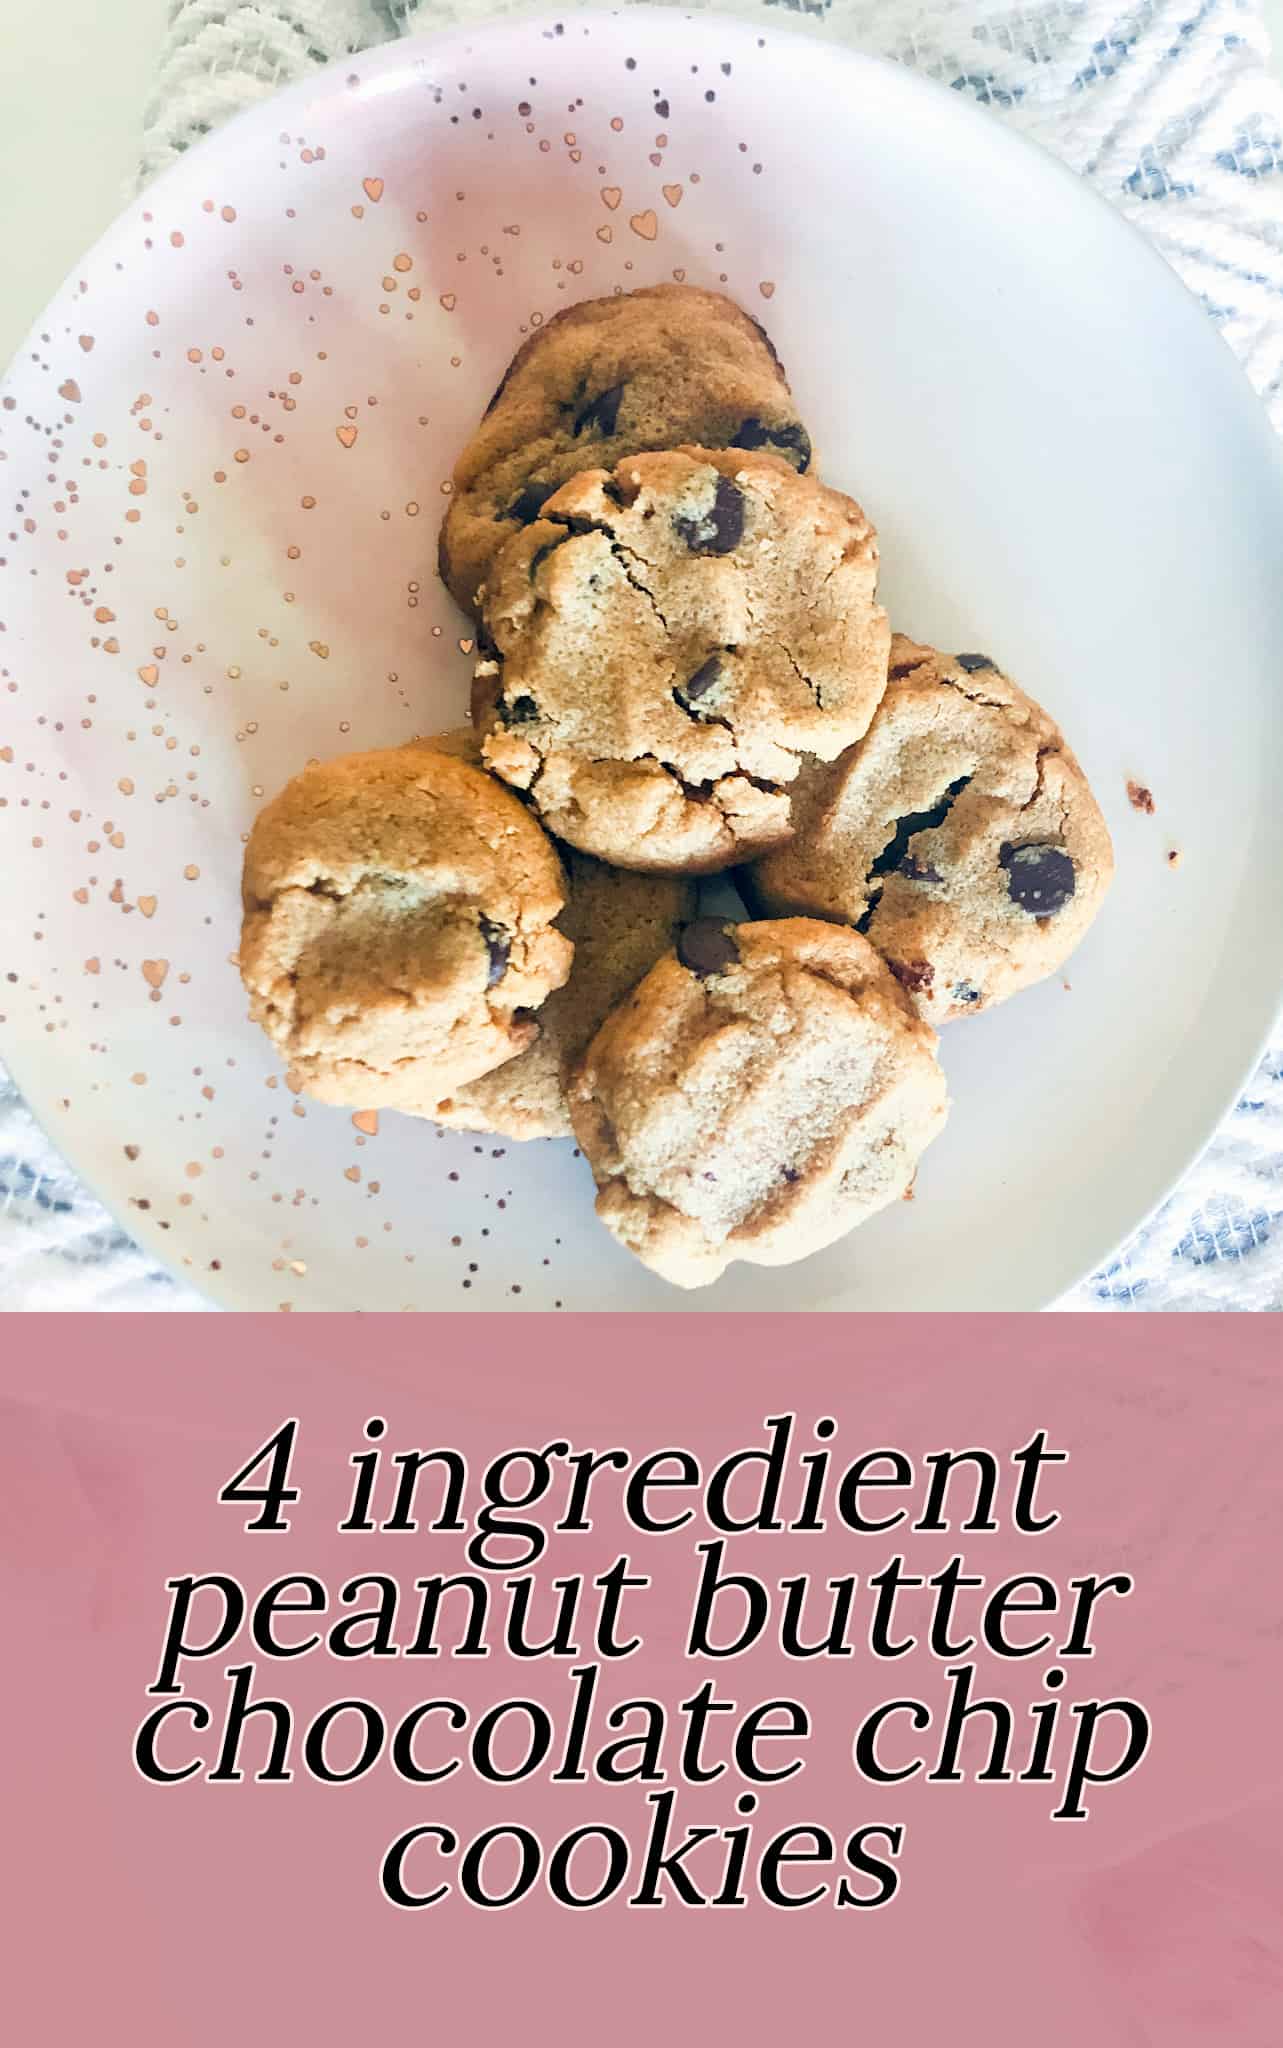 4 ingredient peanut butter chocolate chip cookies